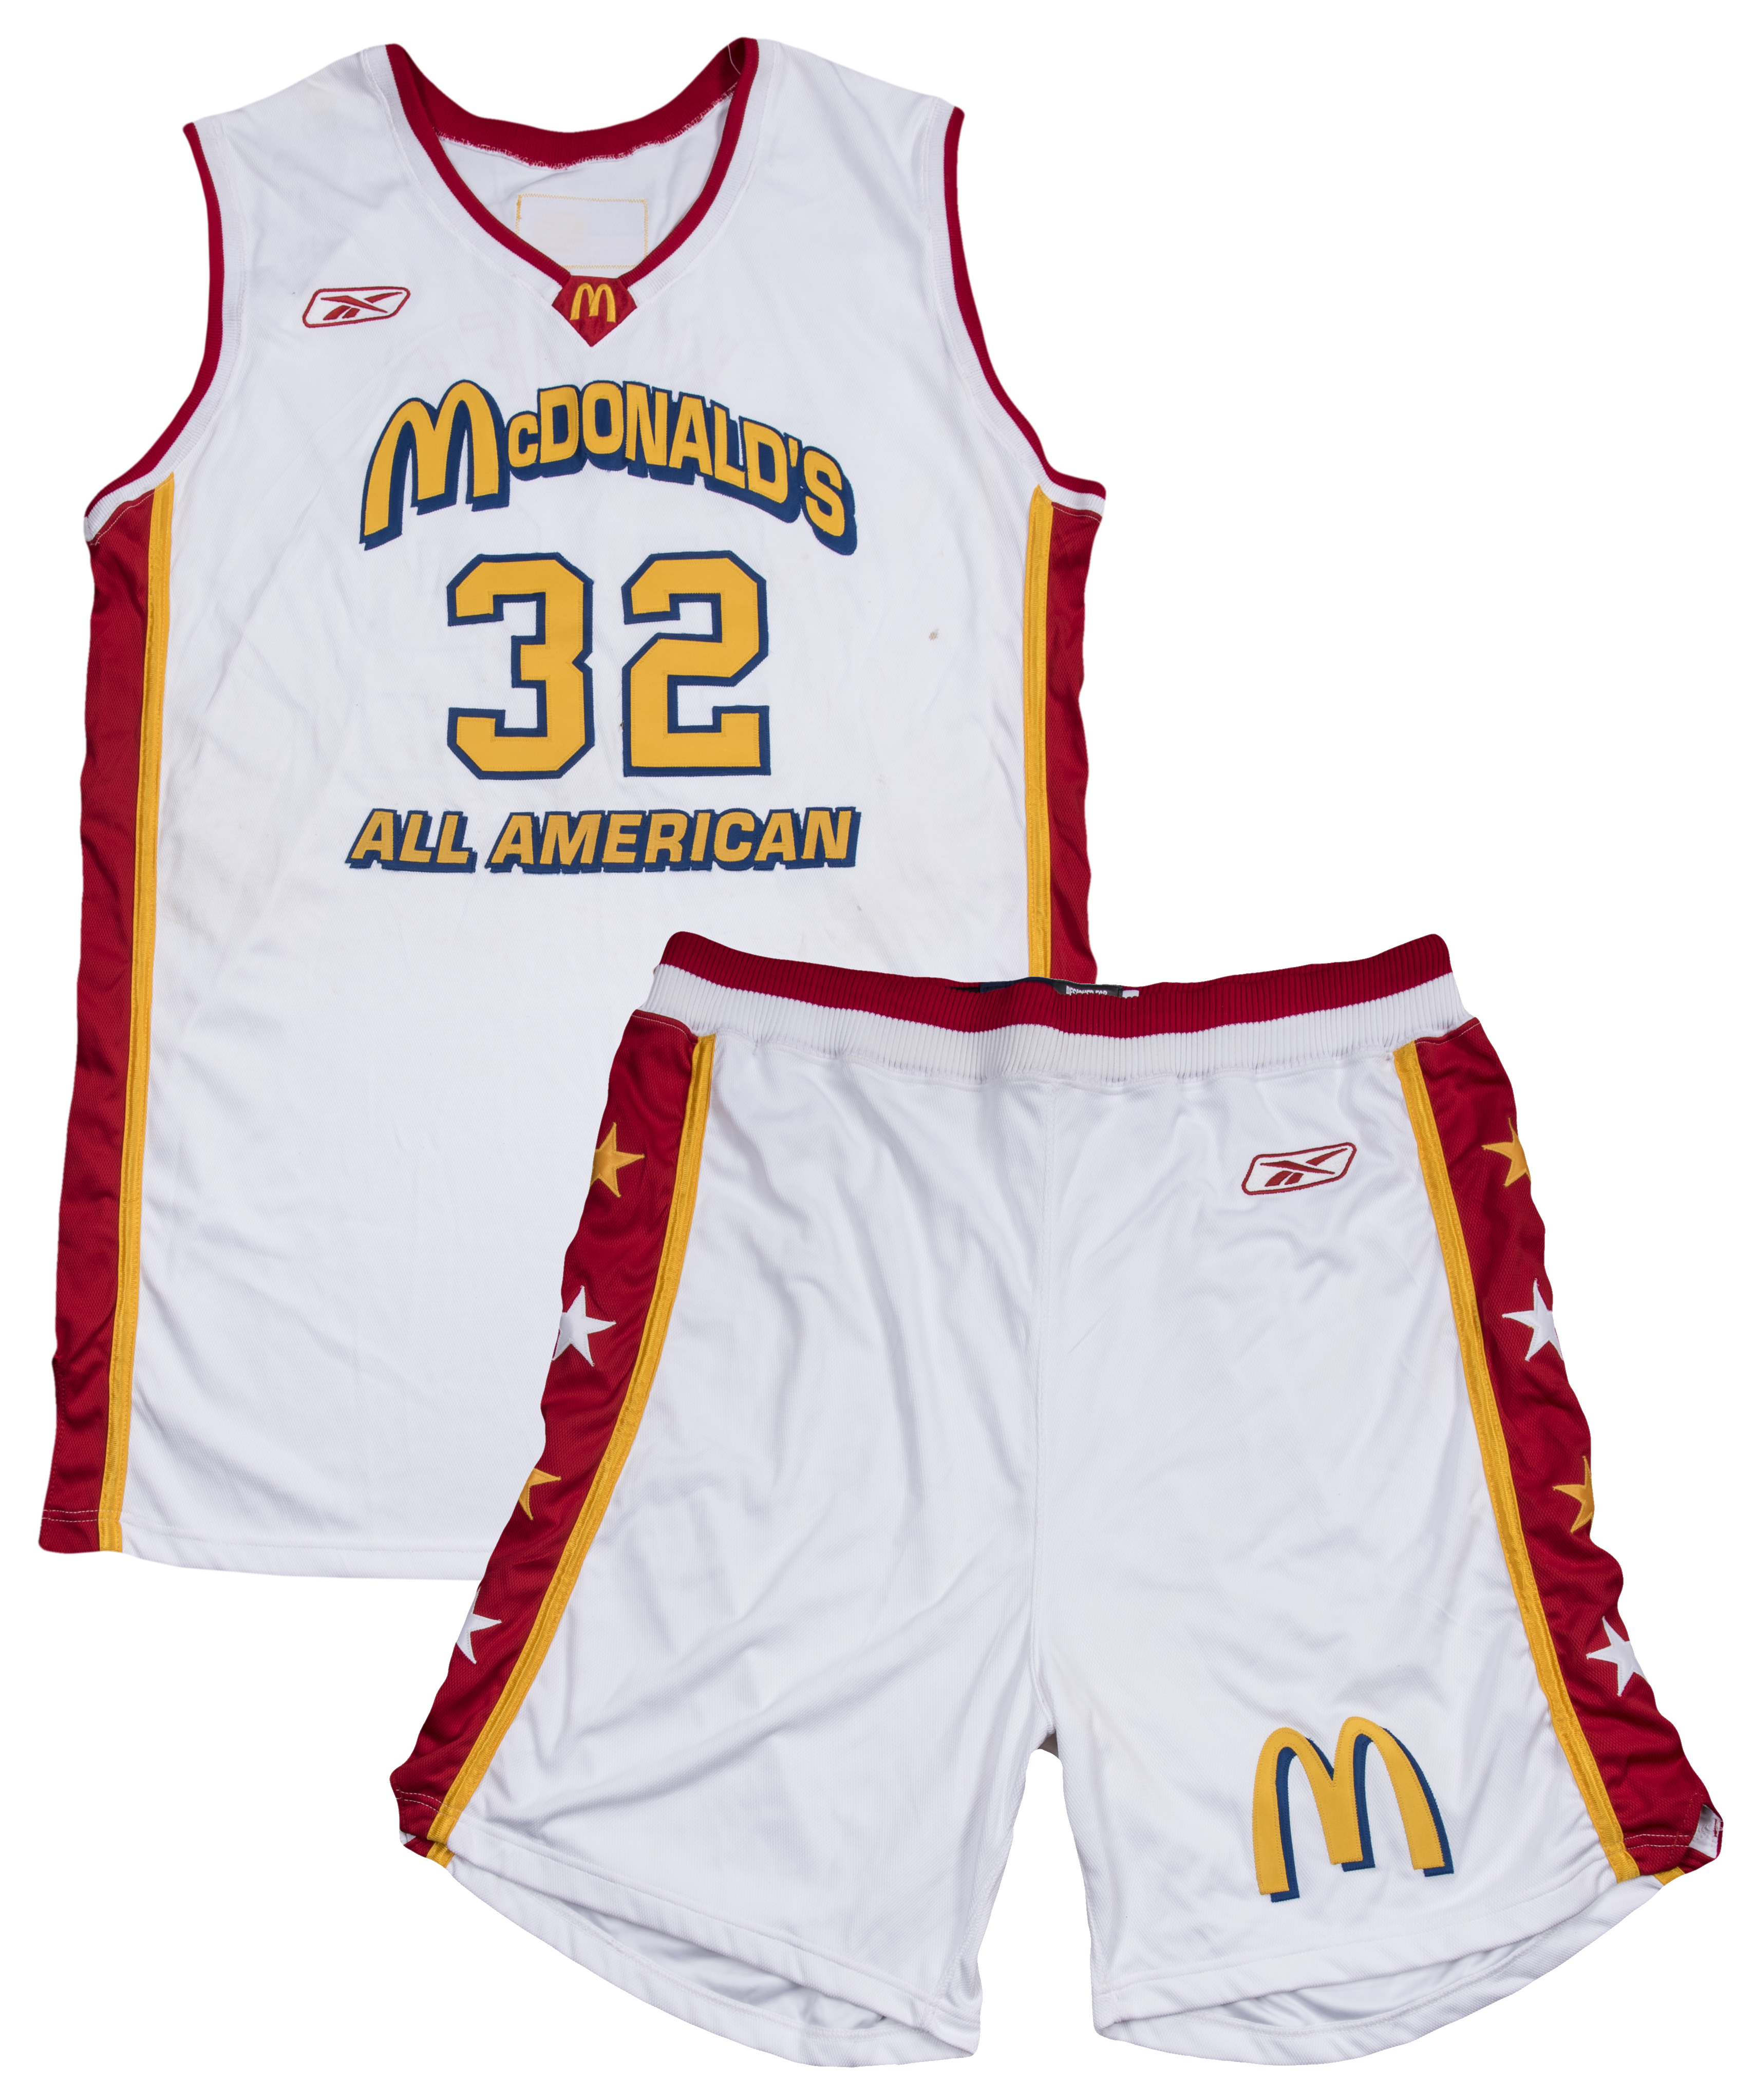 LEBRON JAMES McDONALD ALL AMERICAN JERSEY White NEW SEWN ANY SIZE 